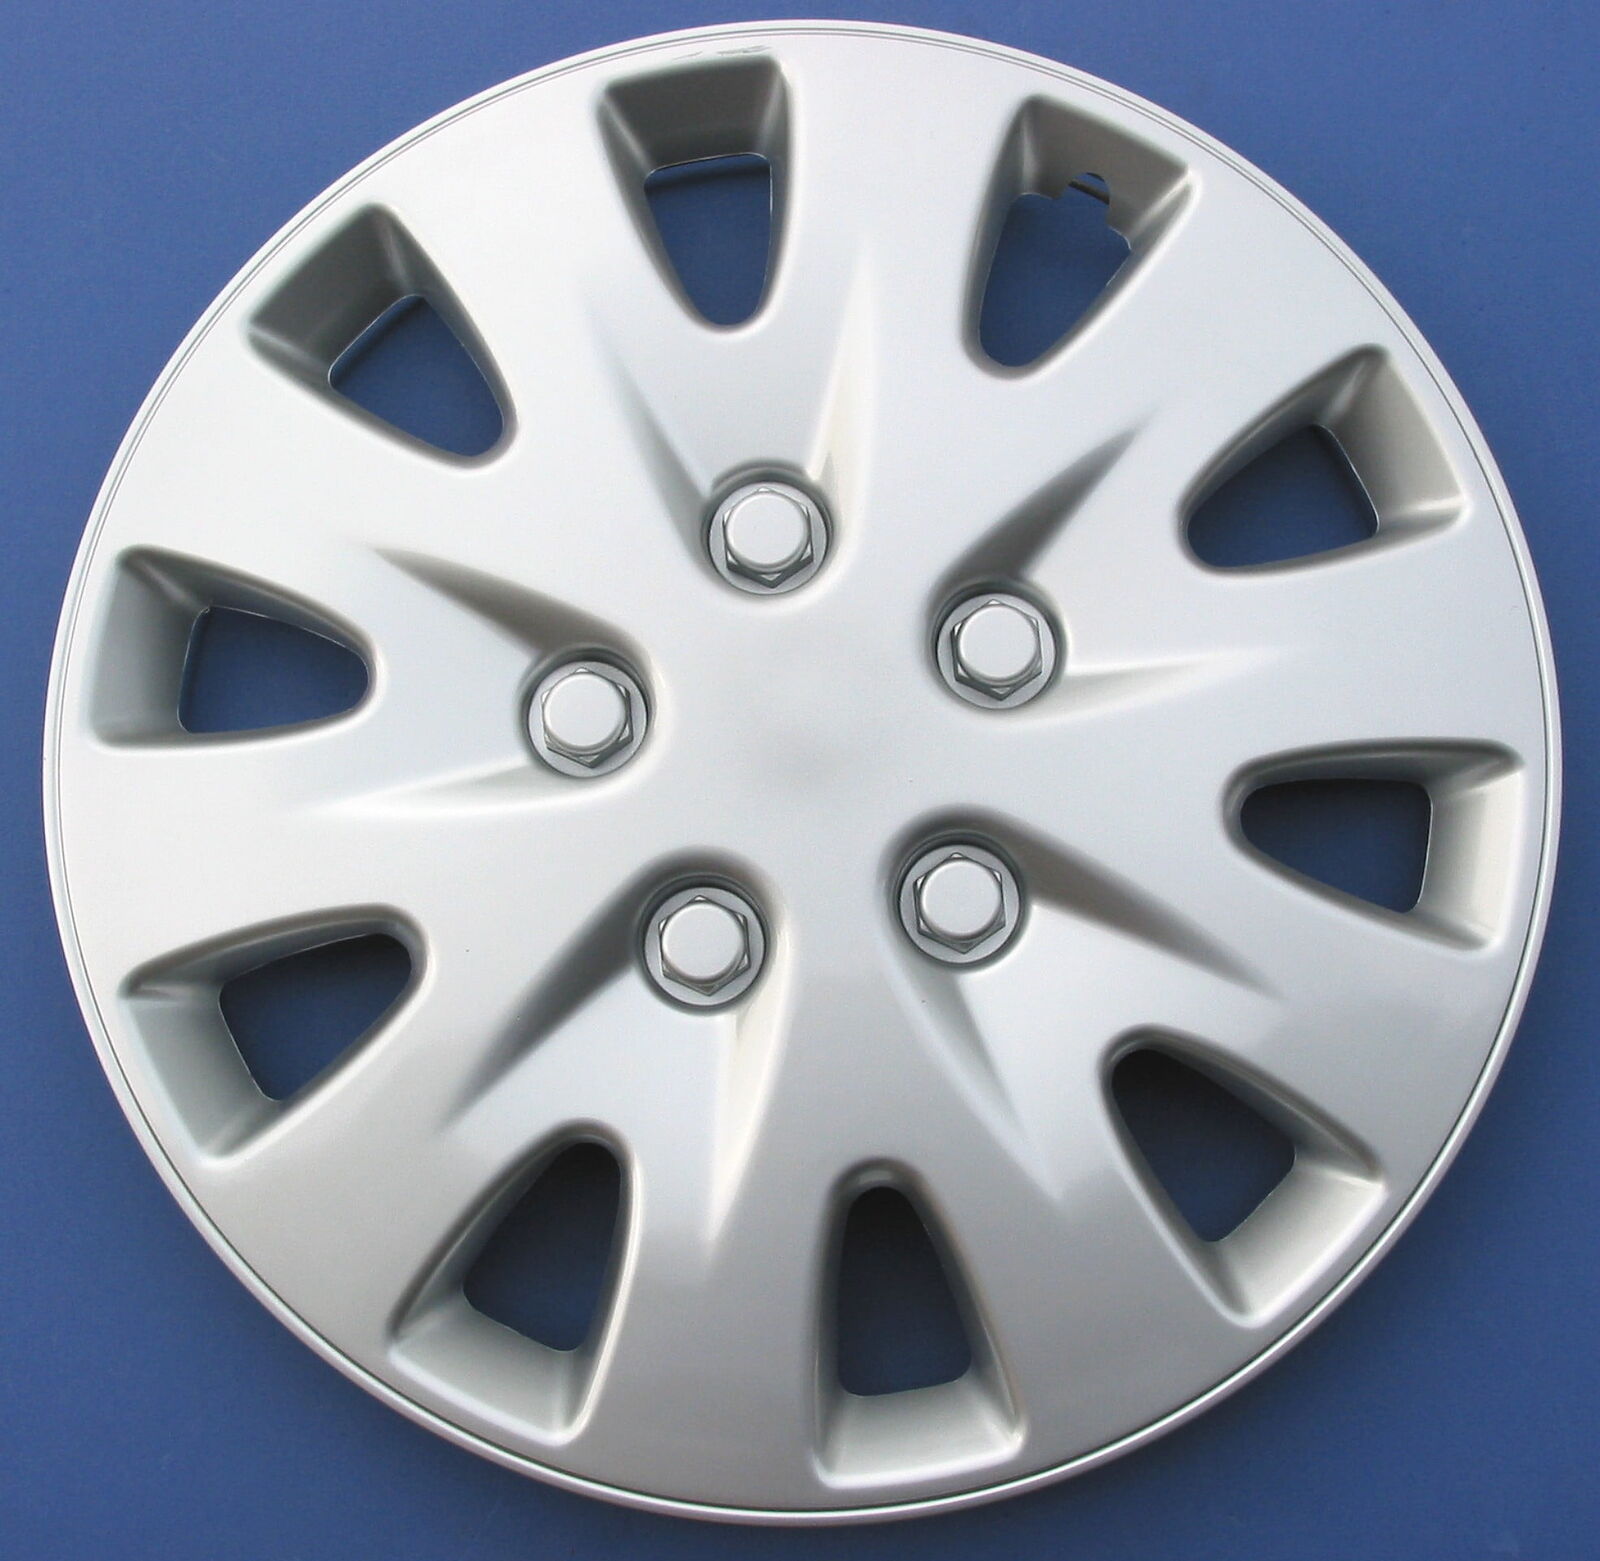 16-in Wheel Cover,Silver Alloy Finish,ABS Plastic Material,Mfg Part